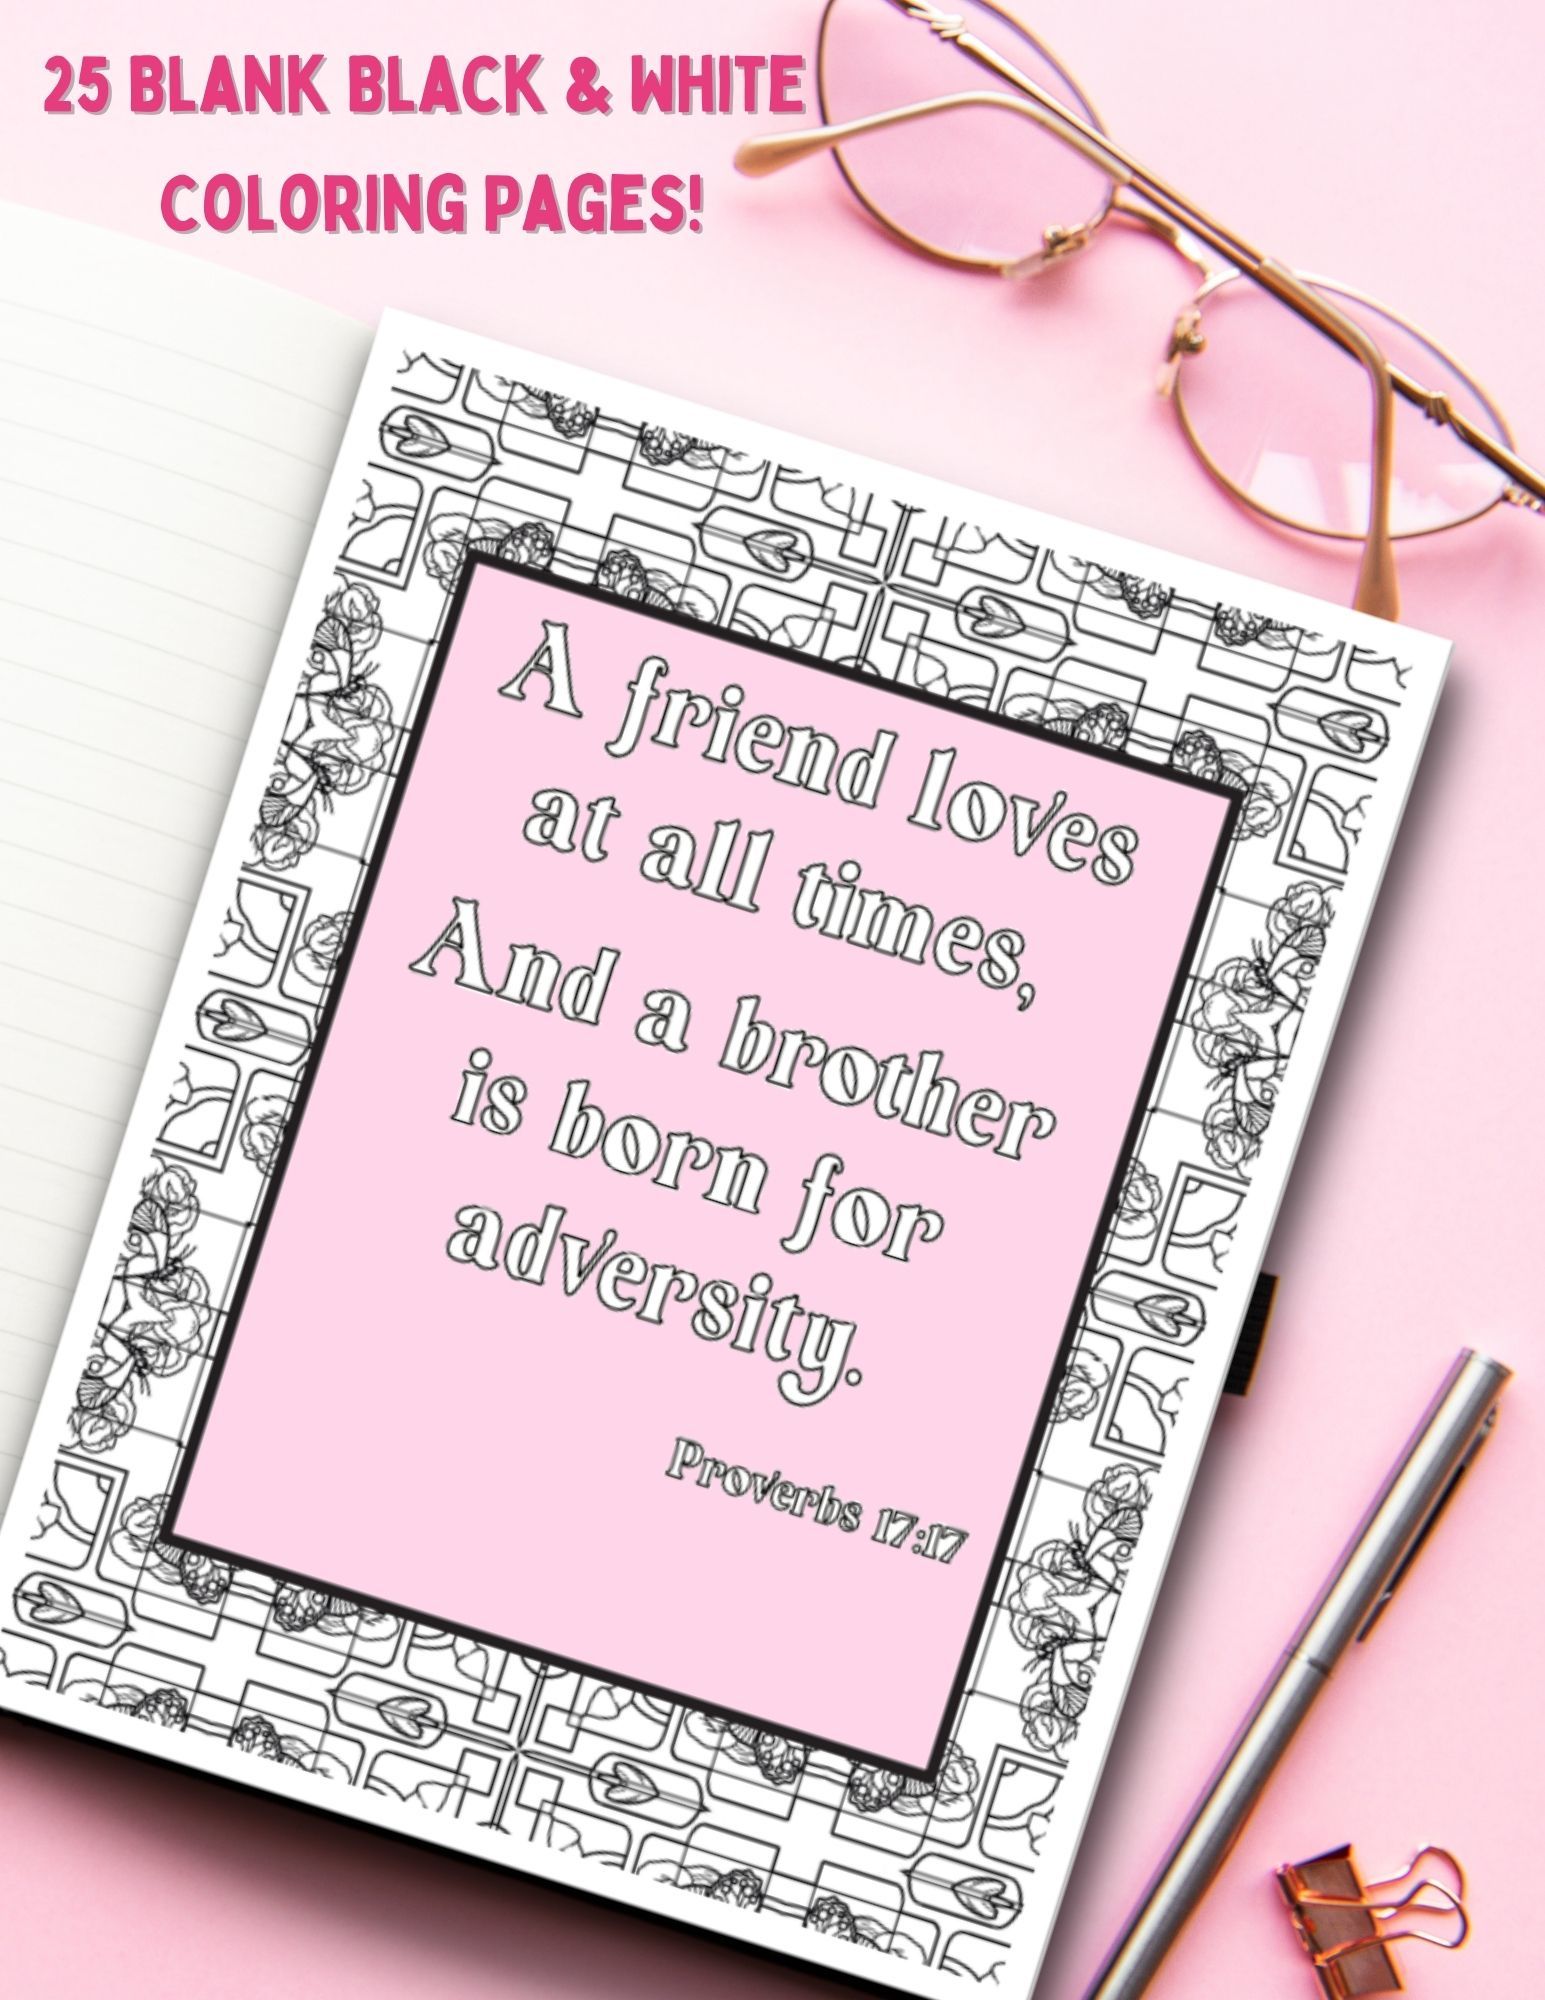 Lettering: 25 blank black and white coloring pages ; coloring sheet graphics in pink; pink background with glasses and pen 